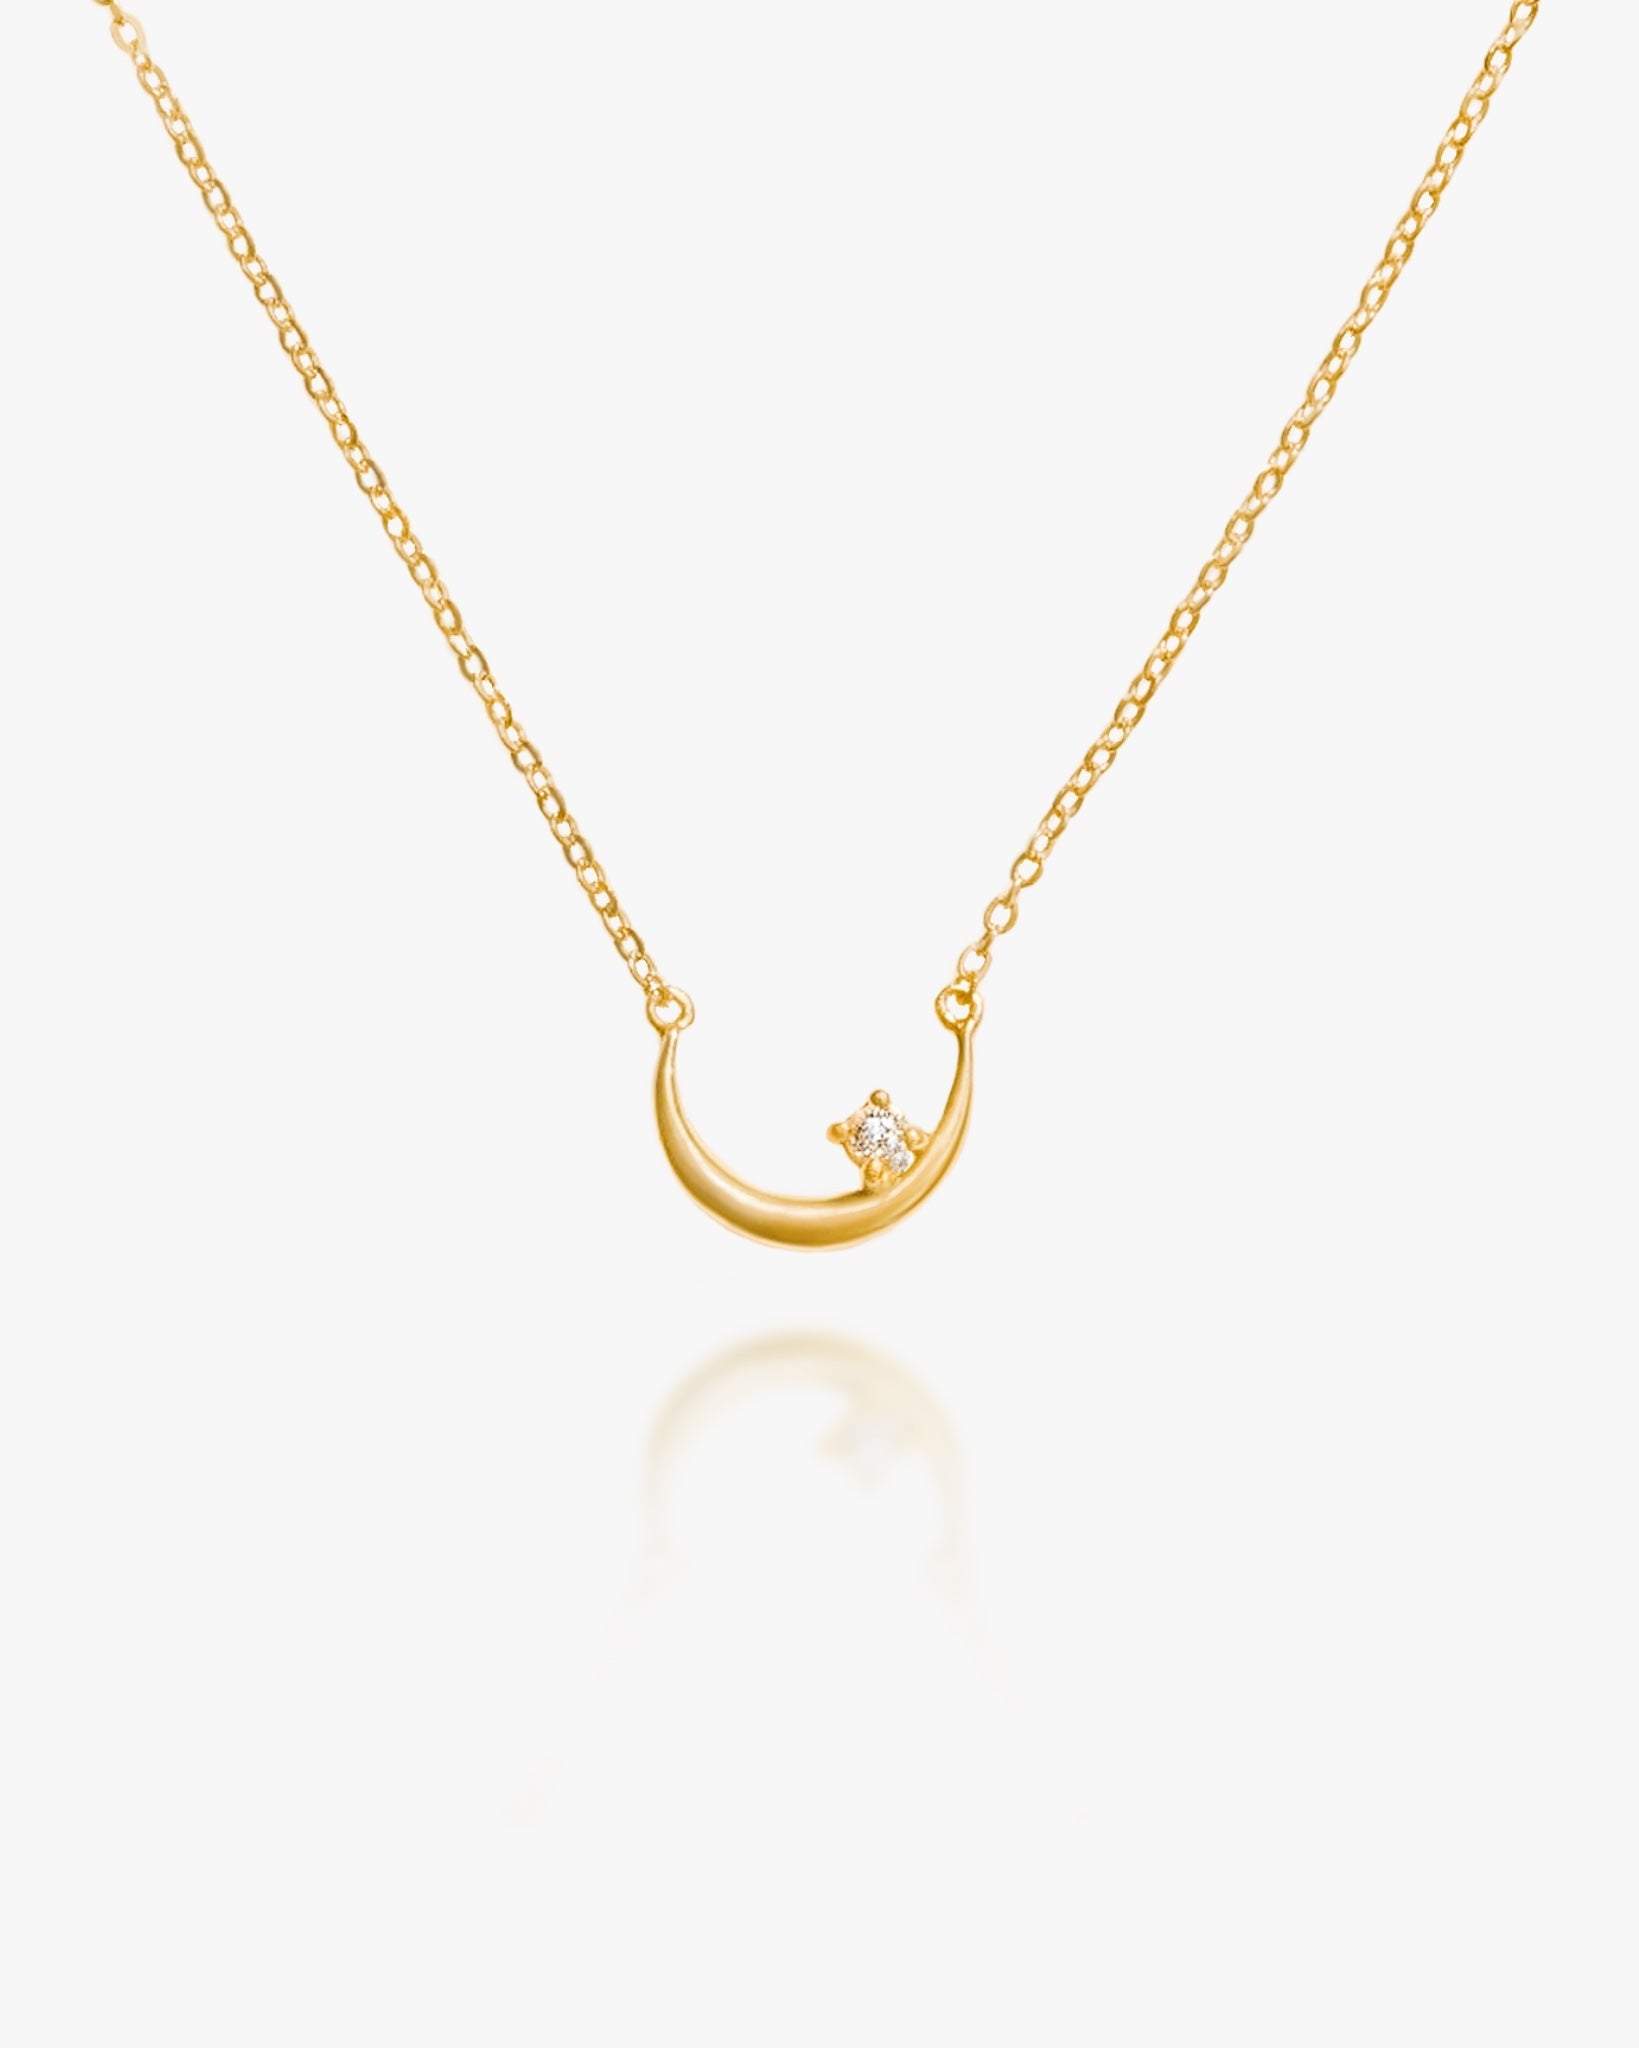 Crescent Moon Necklace / Large Solid Jeweler's Brass Moon Pendant / 14k Gold  Filled Chain / Hand Forged